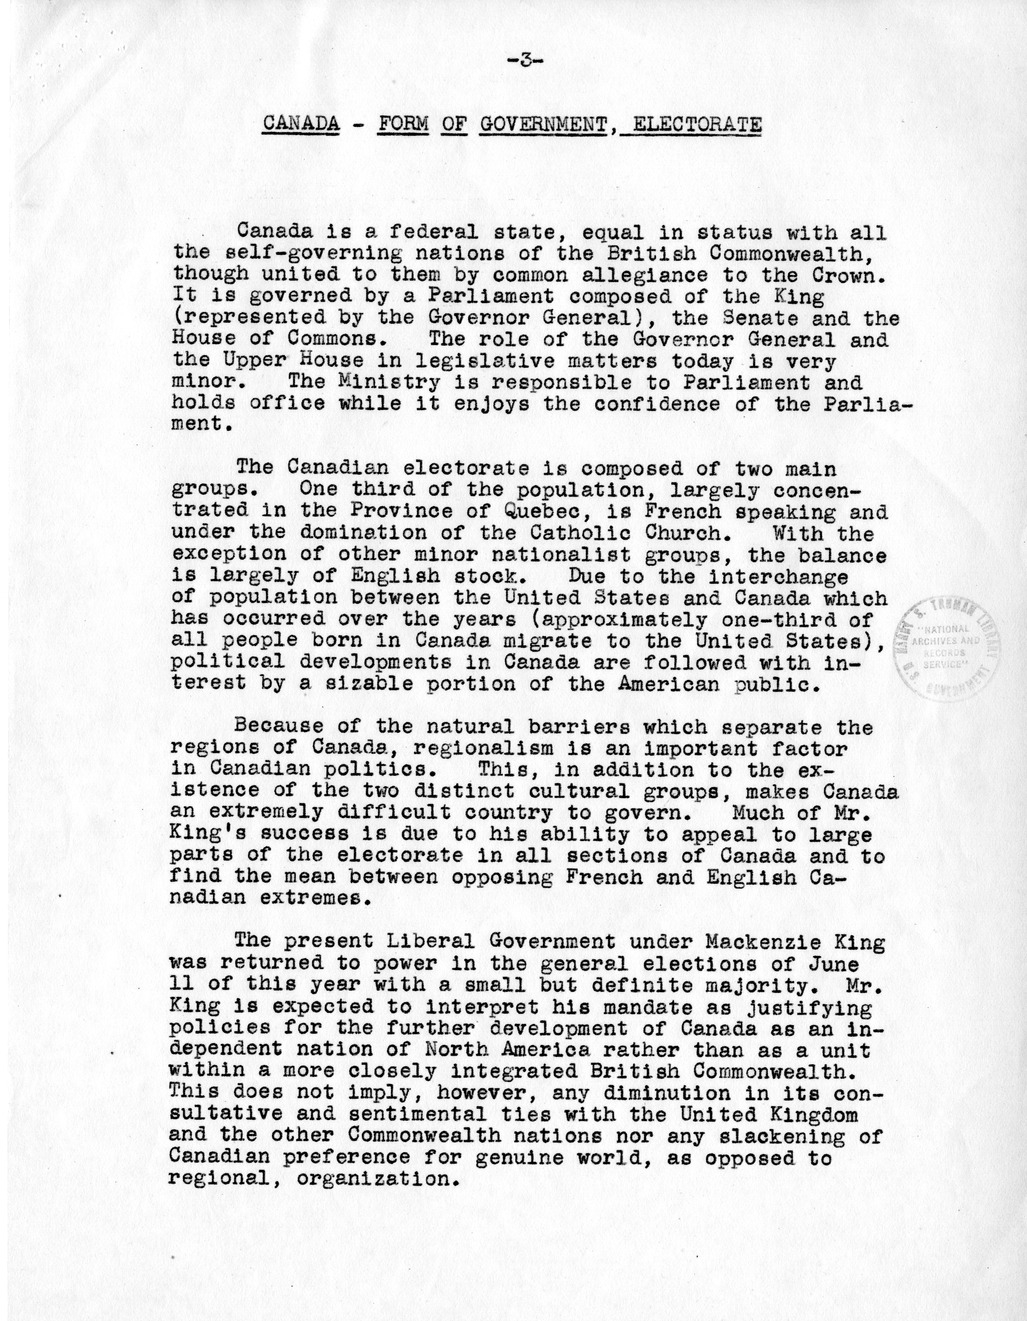 Memorandum from Dean Acheson to President Harry S. Truman, with Attachment